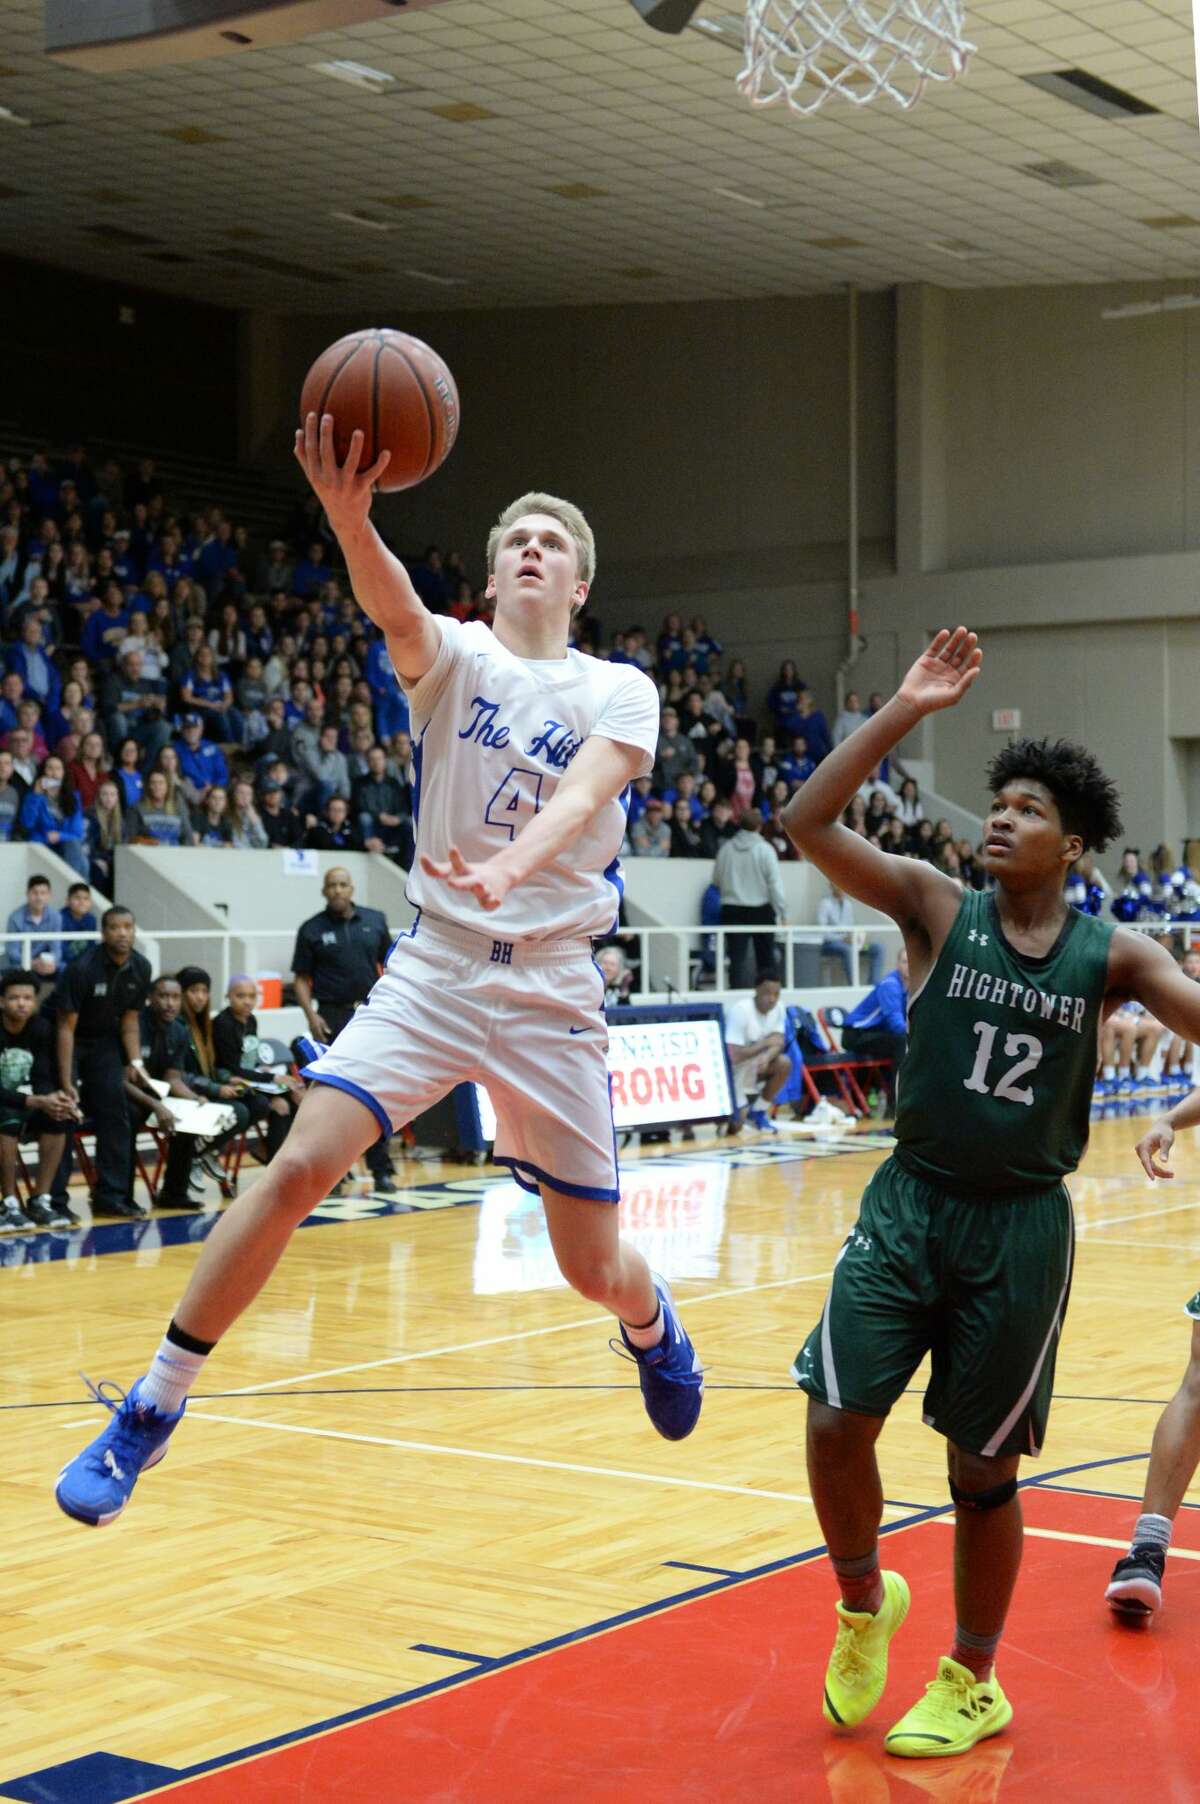 Max Armer (4) of Barbers Hill drives to the basket during the first half of a Class 5A, Region III area-round basketball playoff game between the Hightower Hurricanes and the Barbers Hill Eagles on Thursday, February 21, 2019 at the Phillips Field House, Pasadena, TX.